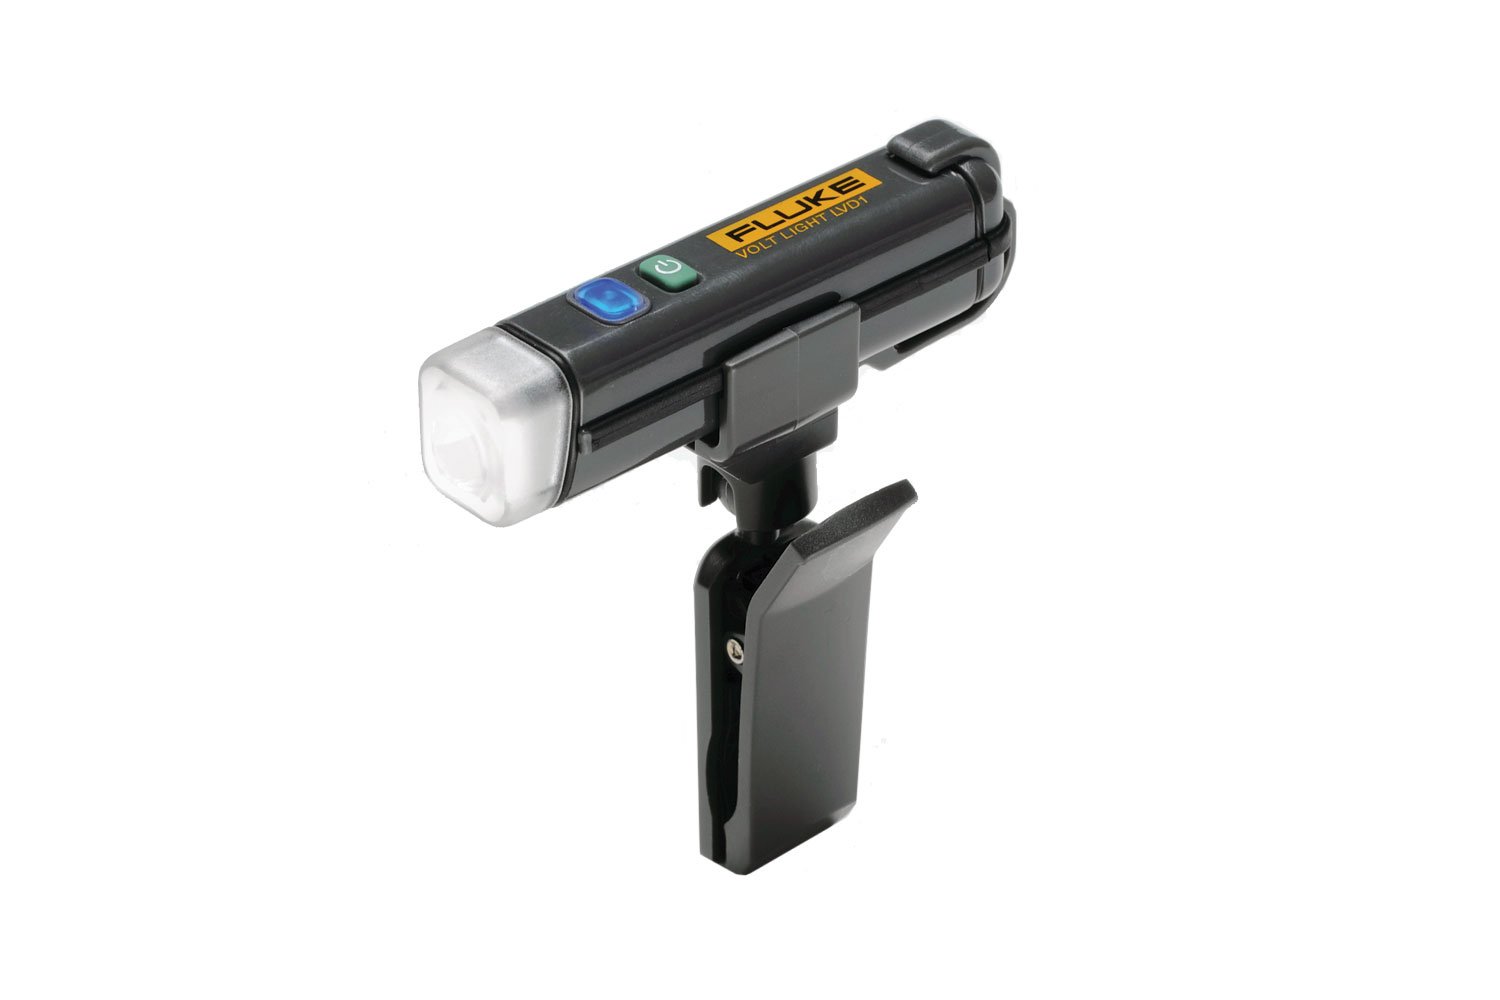 Fluke LVD1A Non-Contact Voltage Tester with LED Flashlight